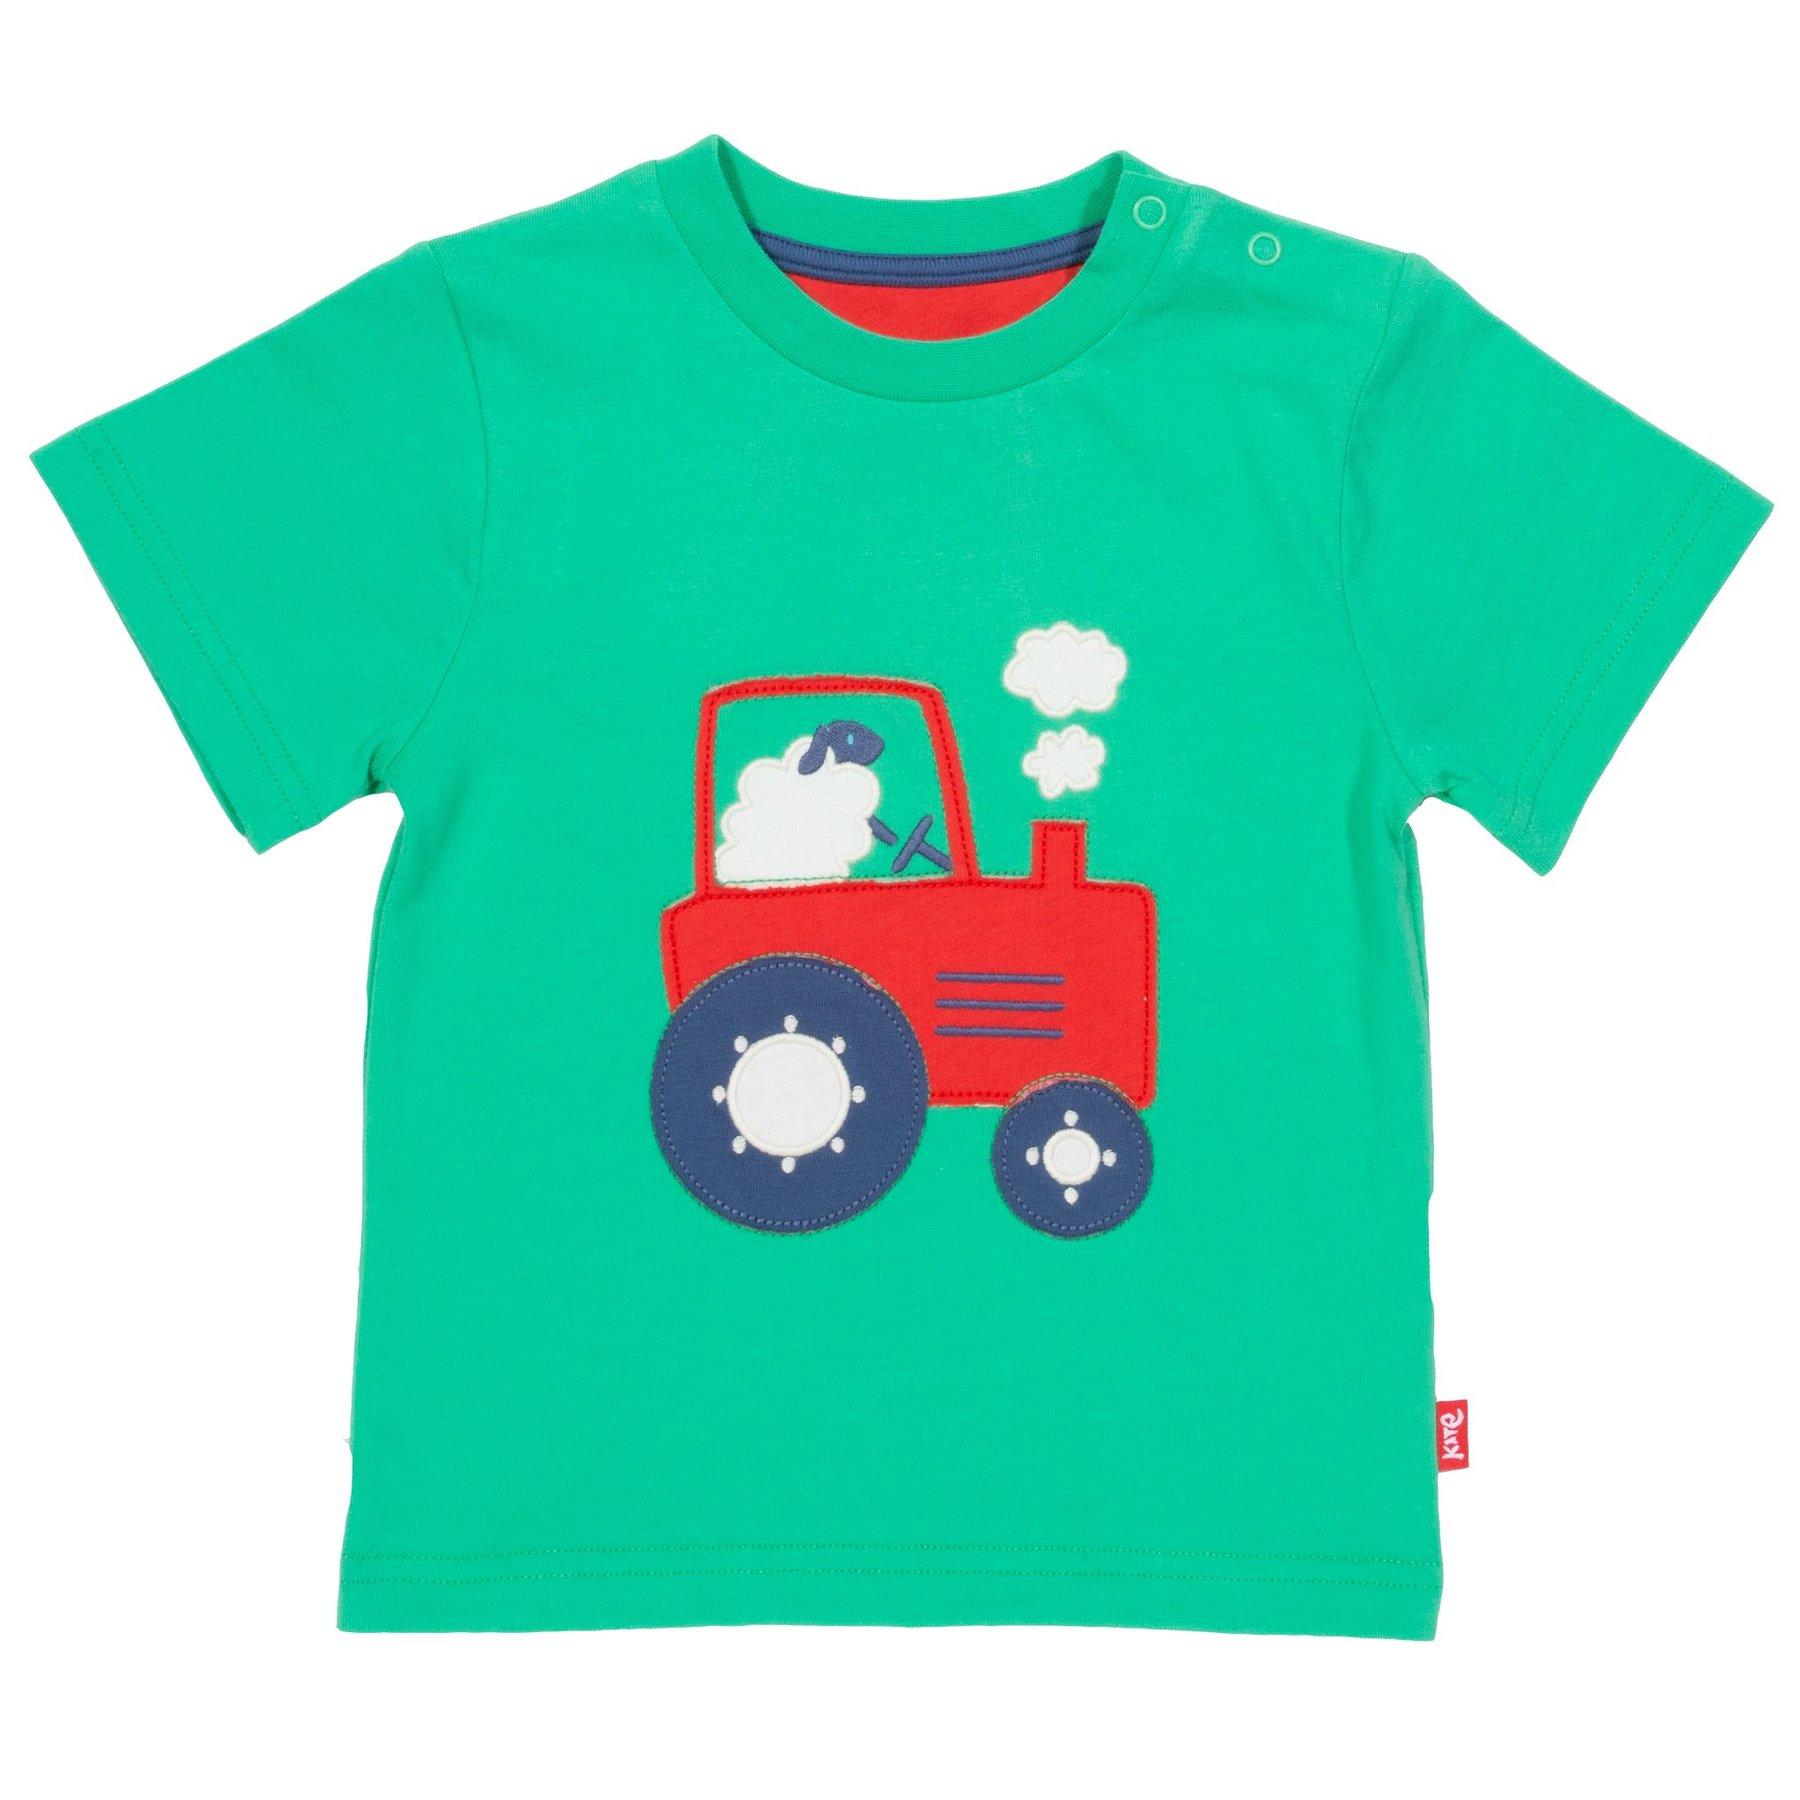 Kite Clothing Tractor Time T-Shirt front